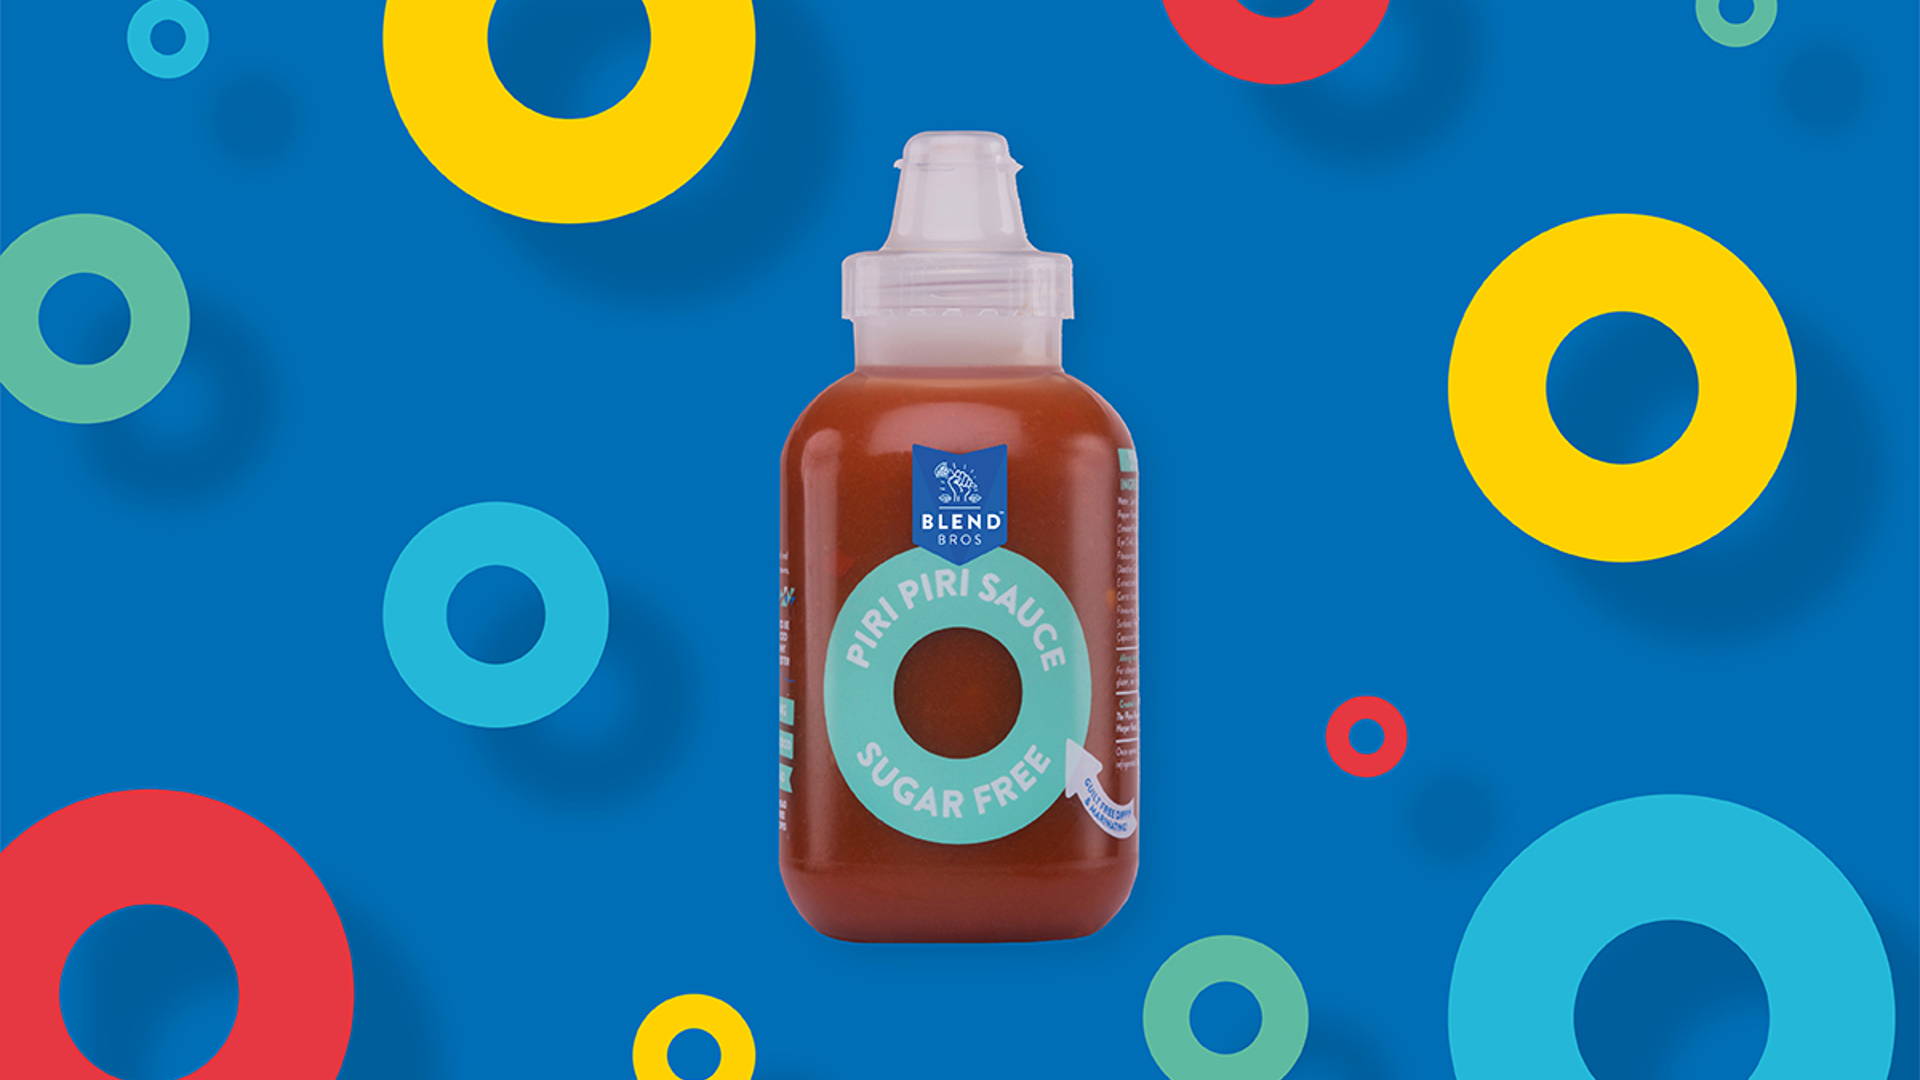 Featured image for Blend Bros is a Gender Neutral No-Sugar Sauce Brand Aiming to Spice Things Up